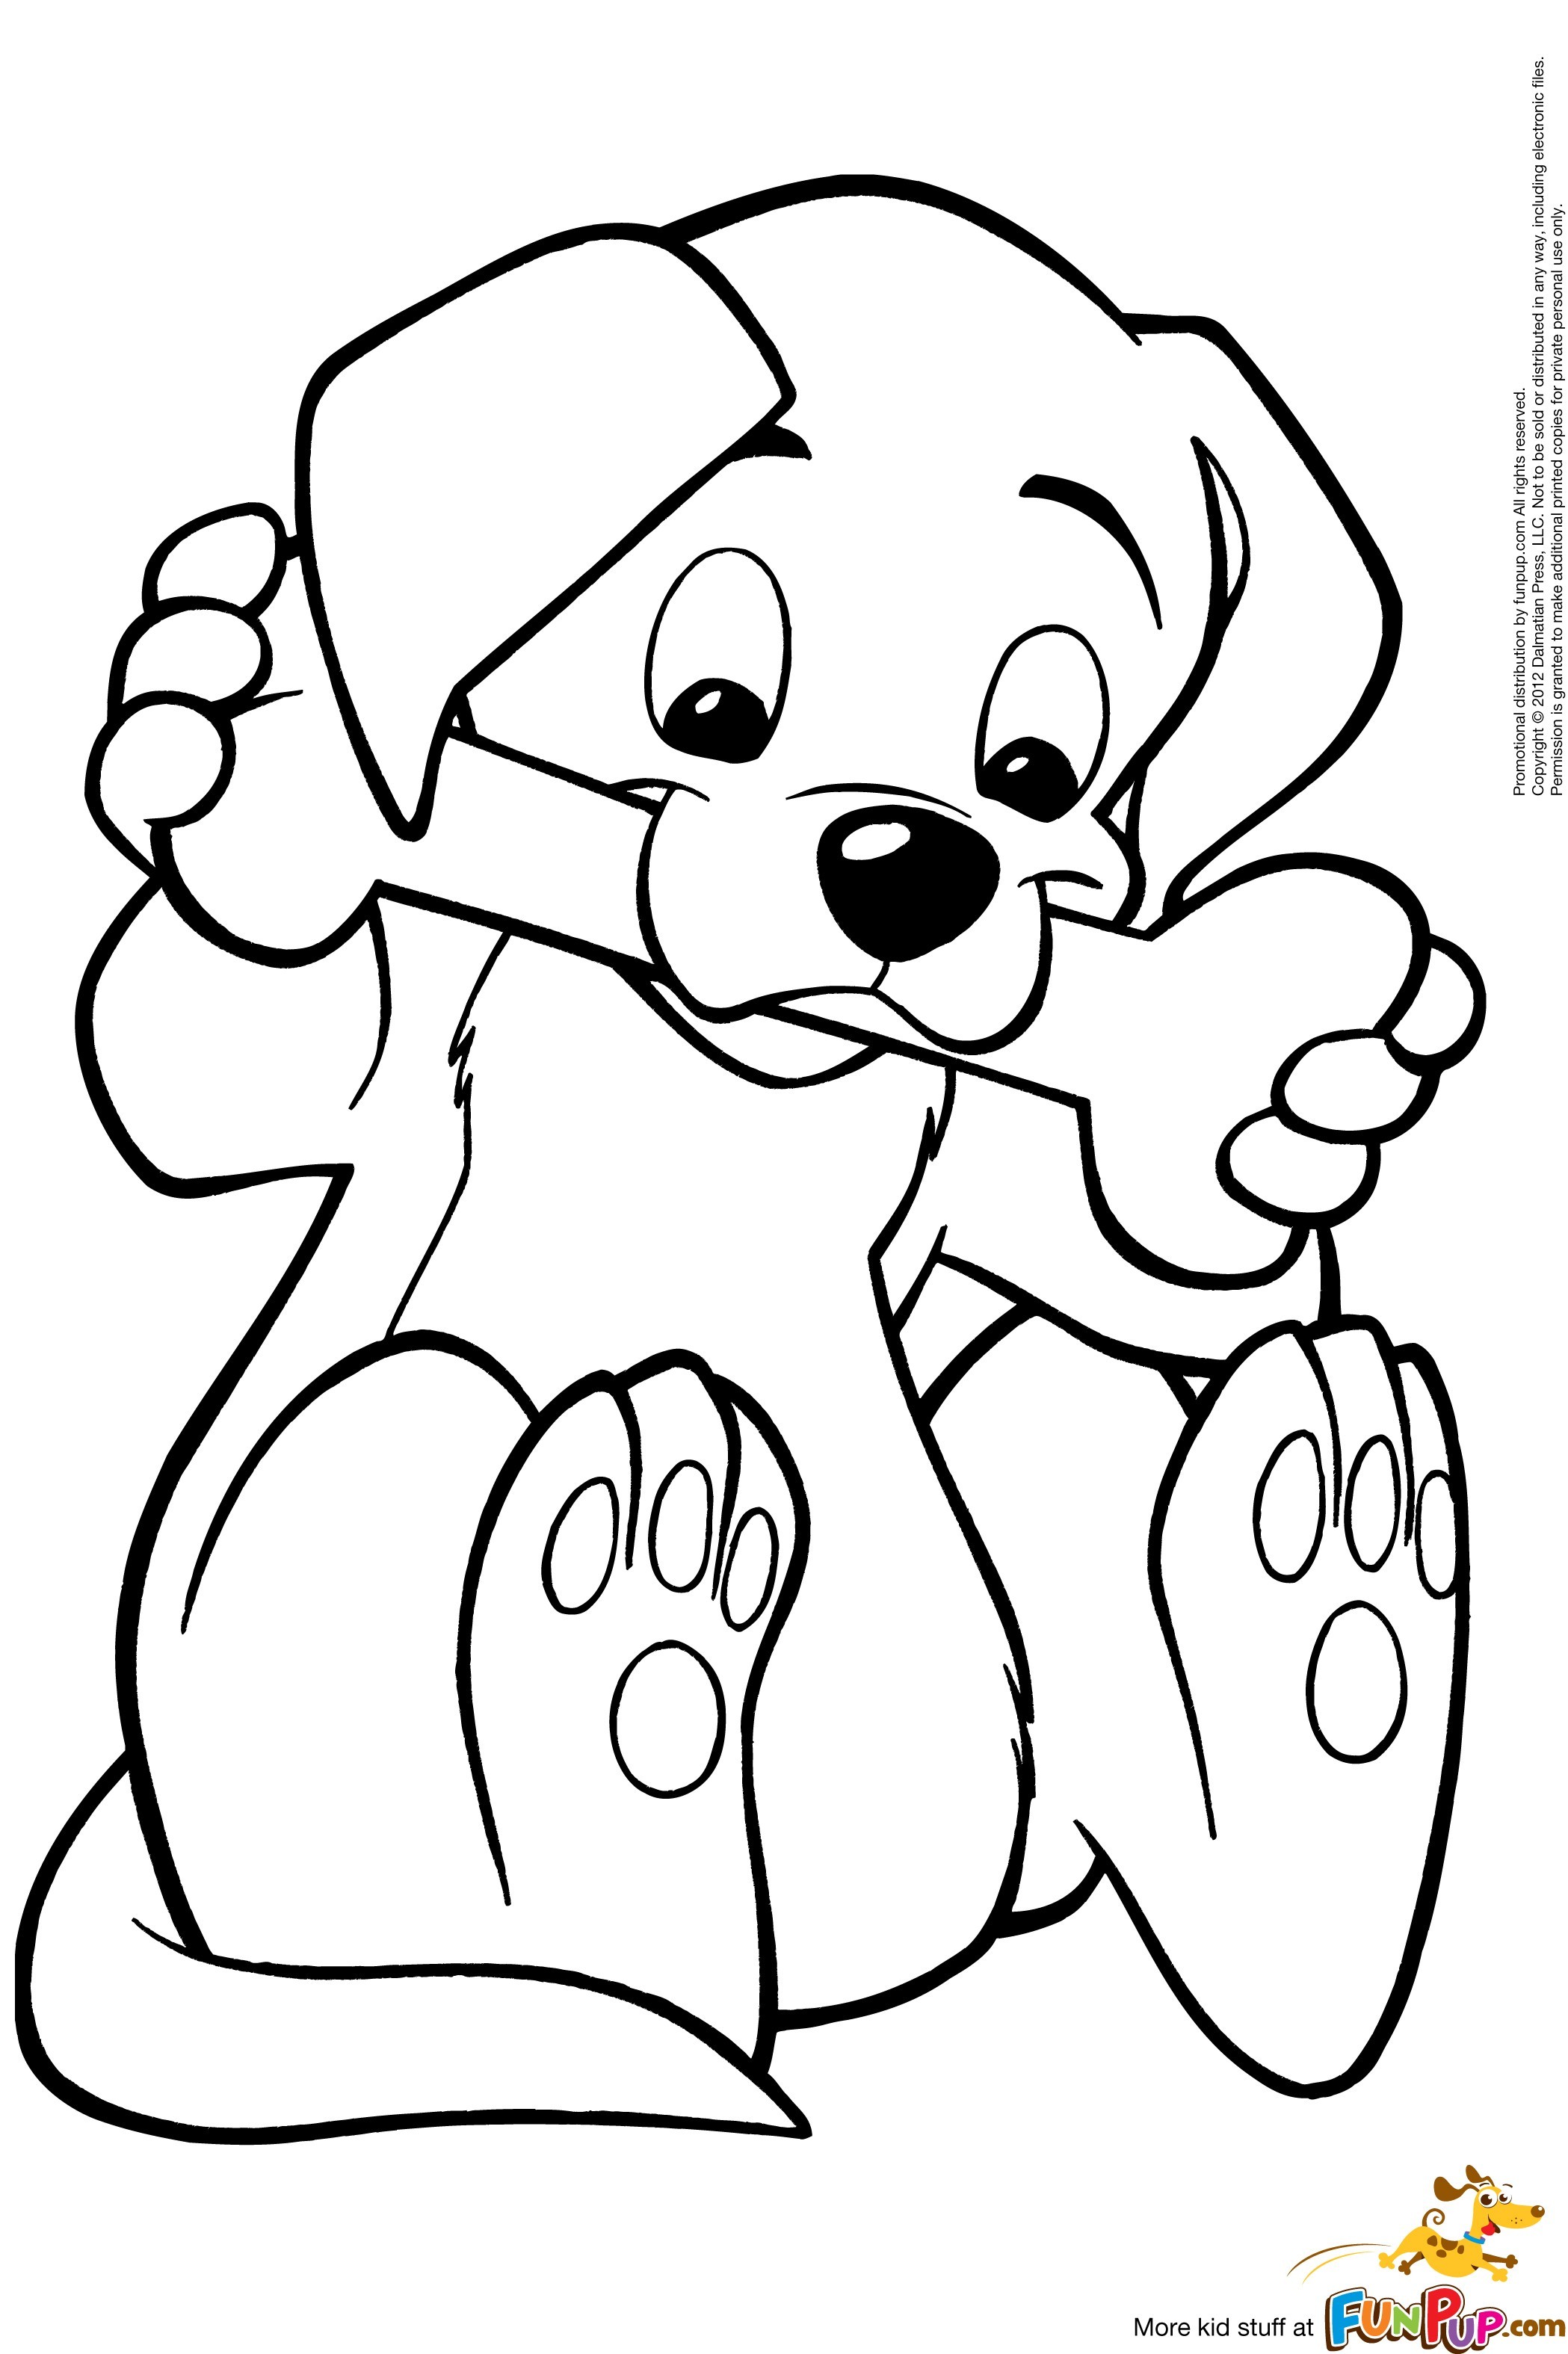 Cartoon Puppy Coloring Pages at GetDrawings Free download